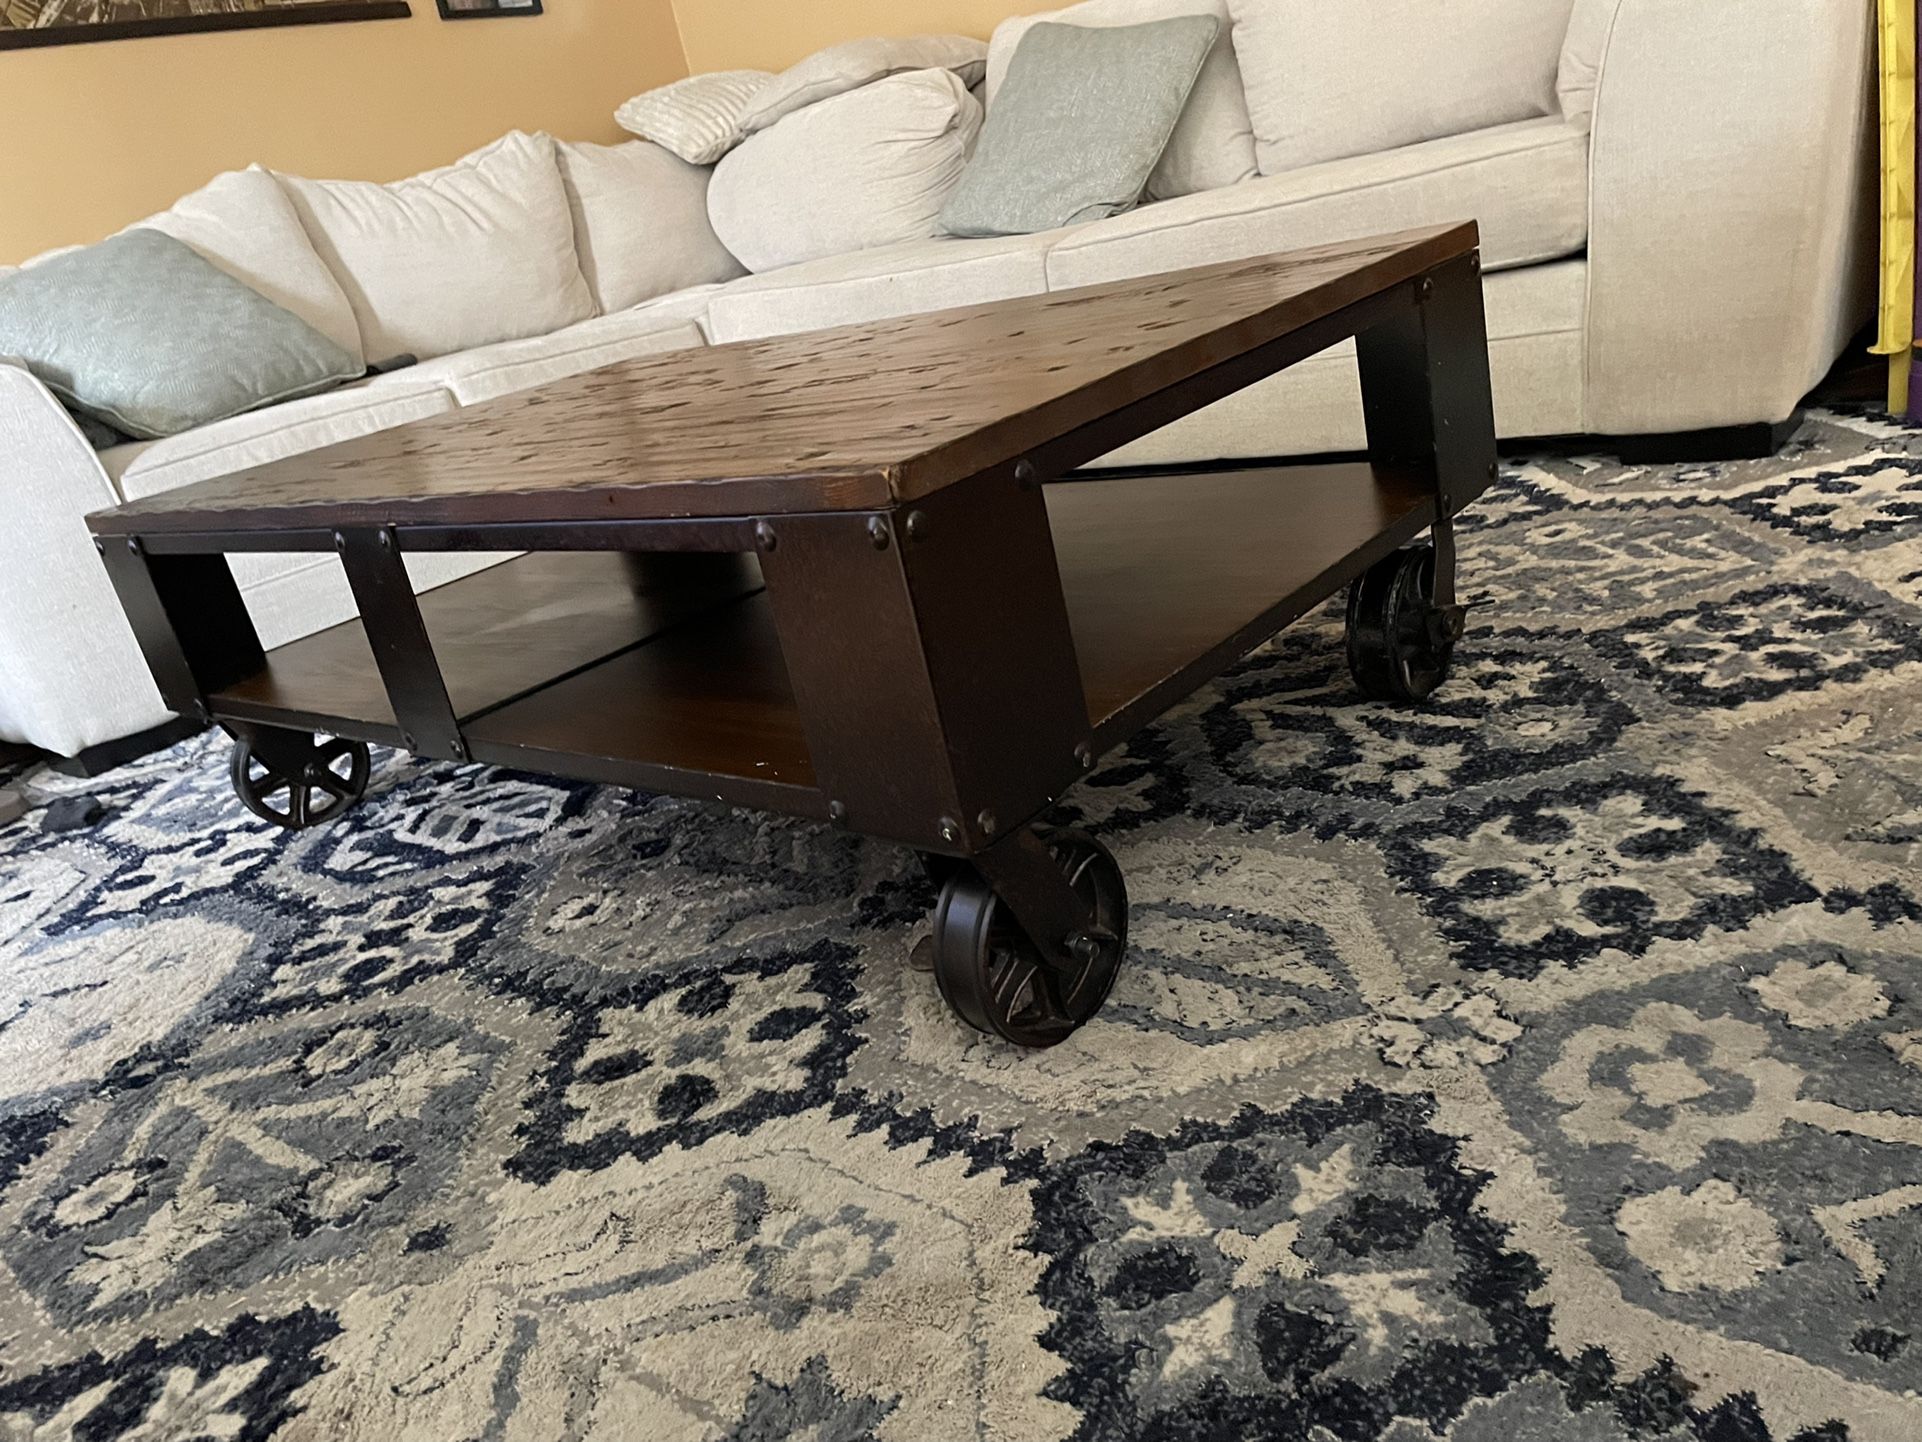  Mountainier Coffee Table With Wheels